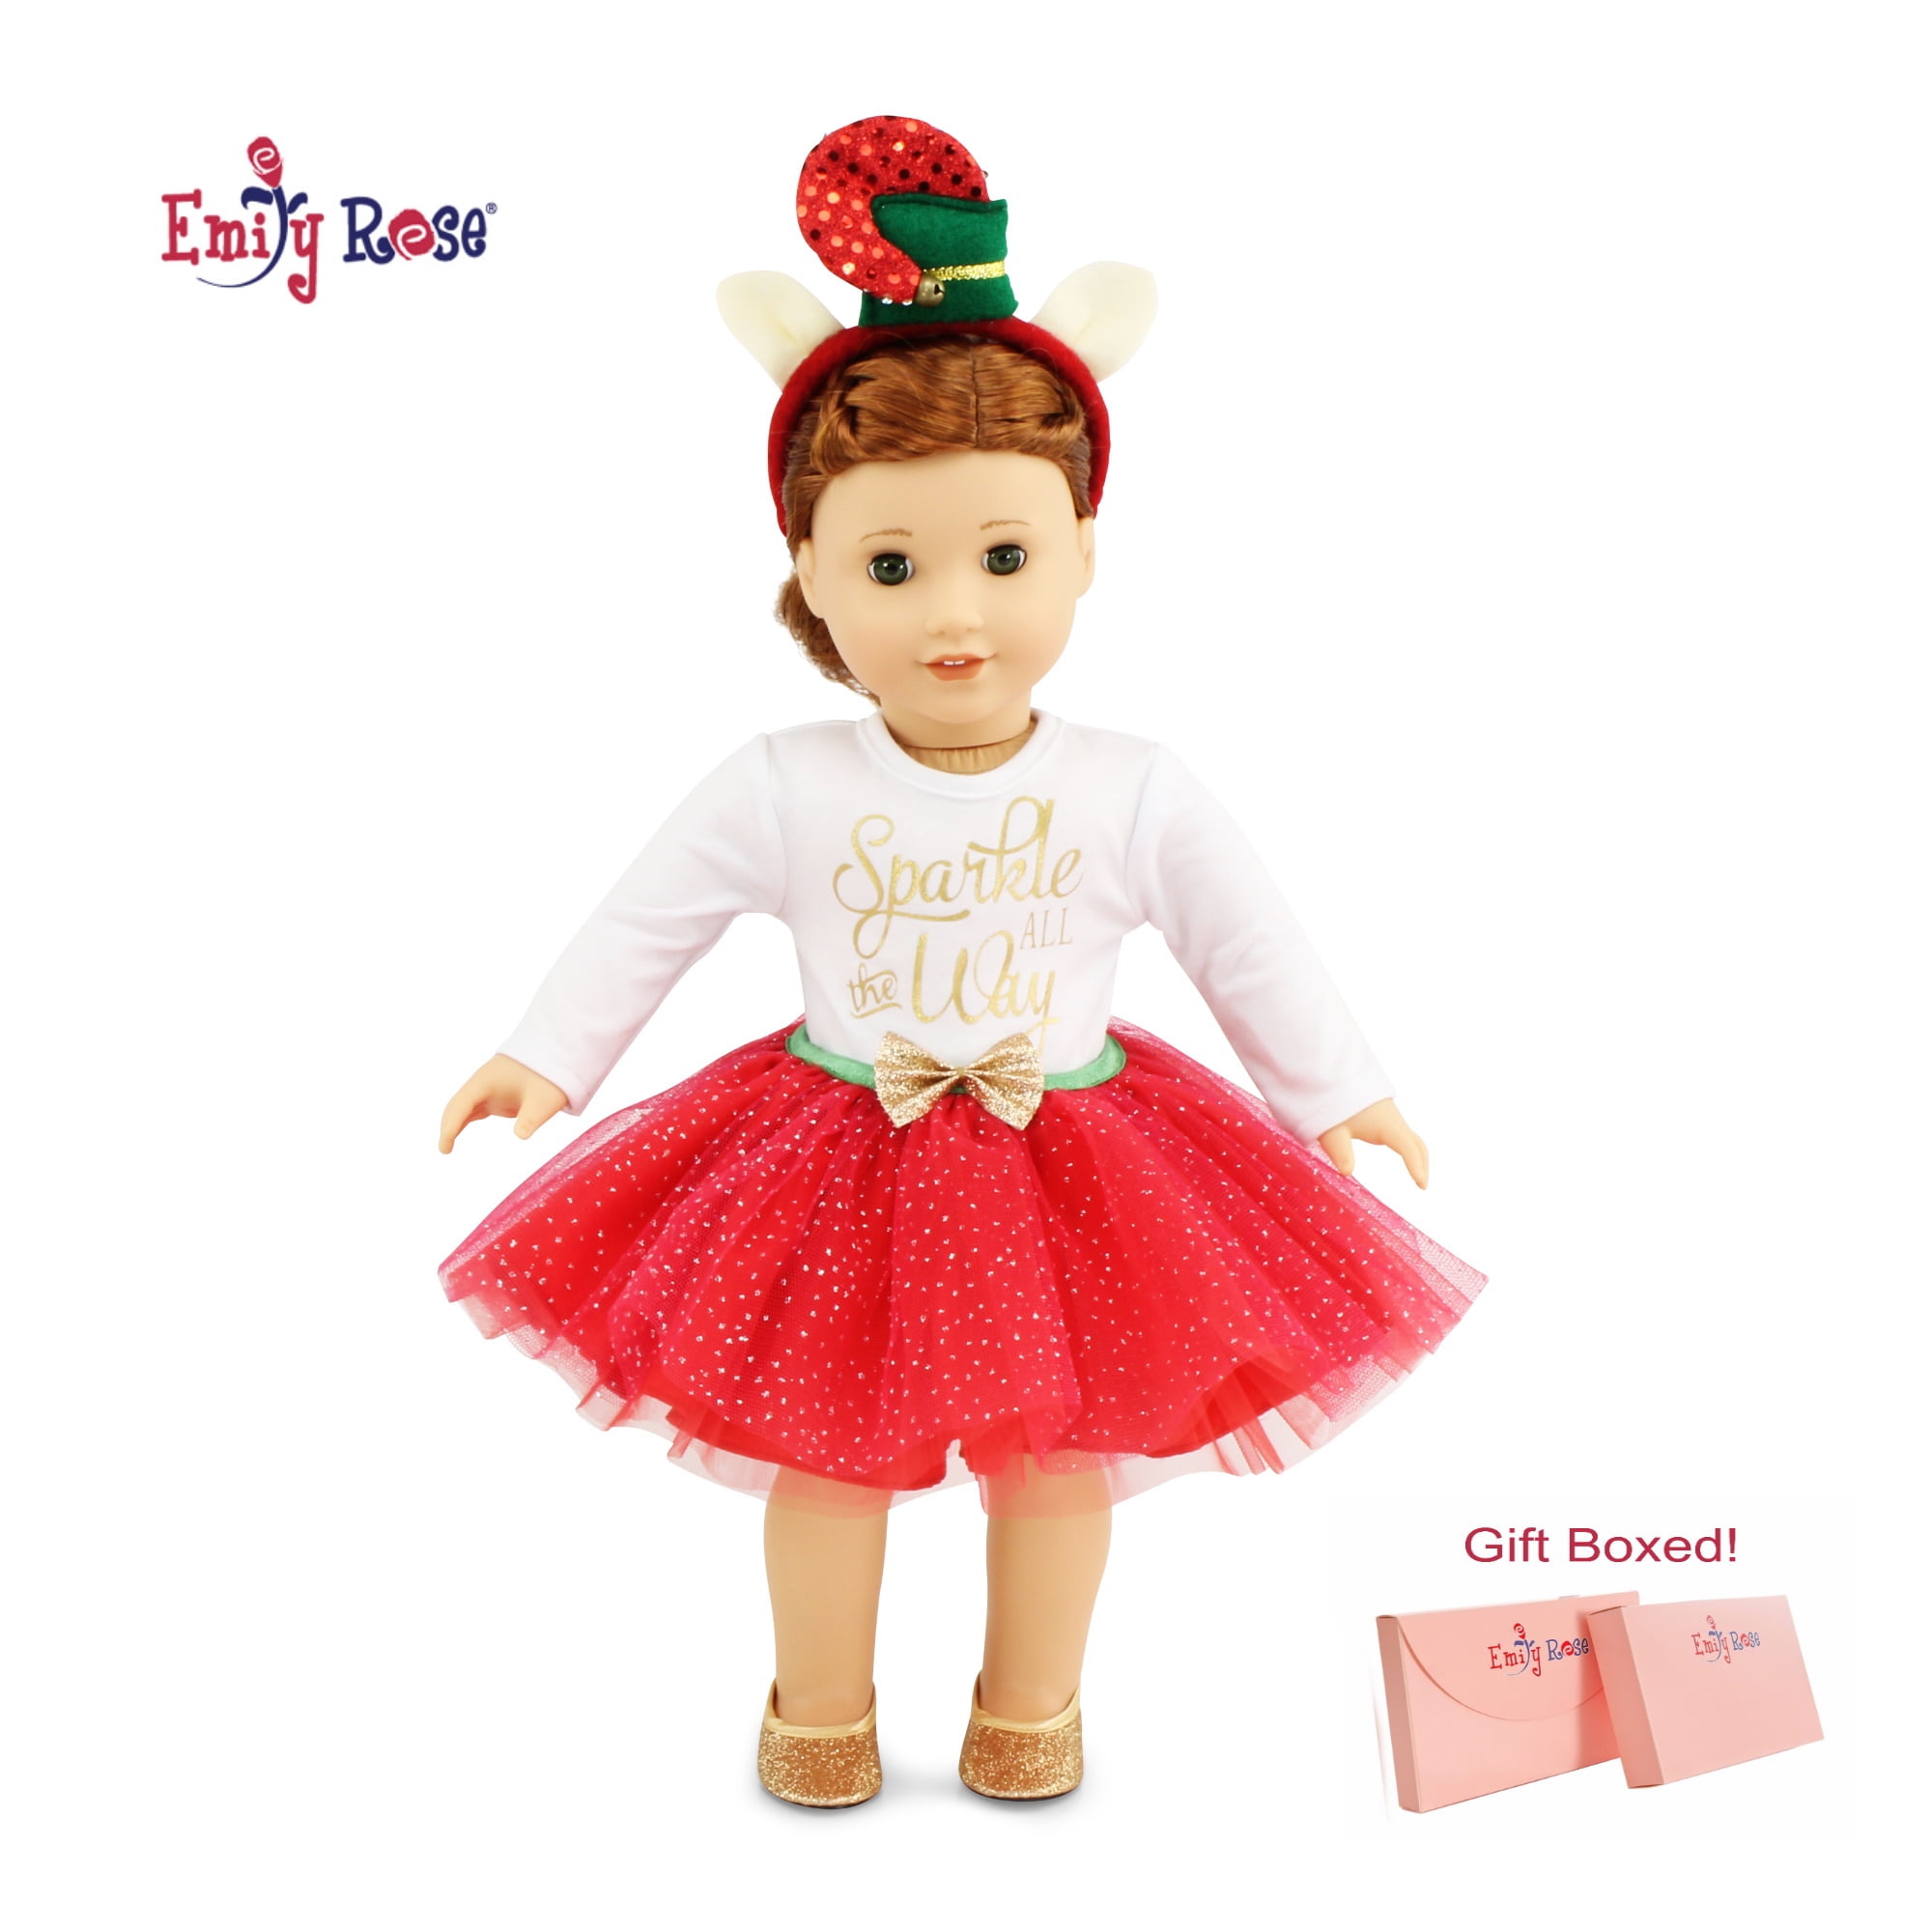 Red Glittery Shoes that fit American Girl Dolls 